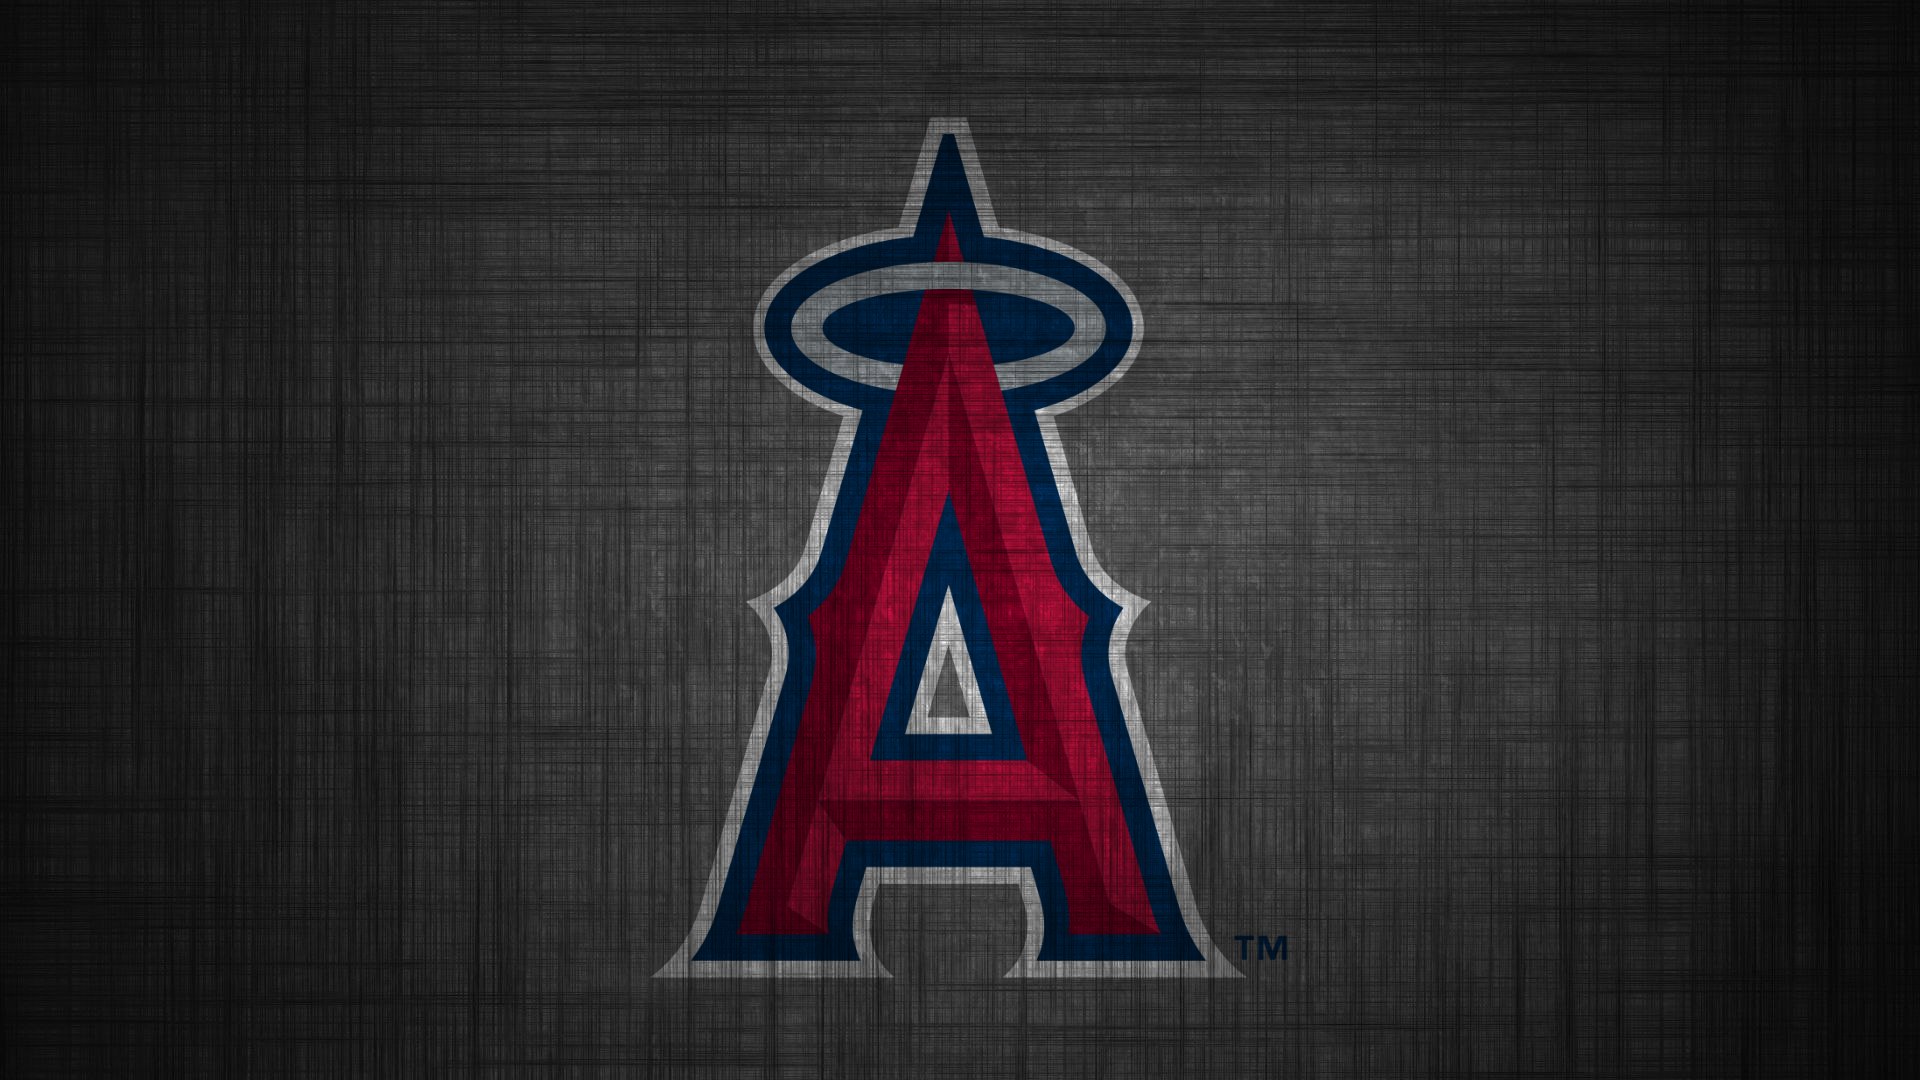 Los Angeles Angels HD Wallpaper Full HD Pictures